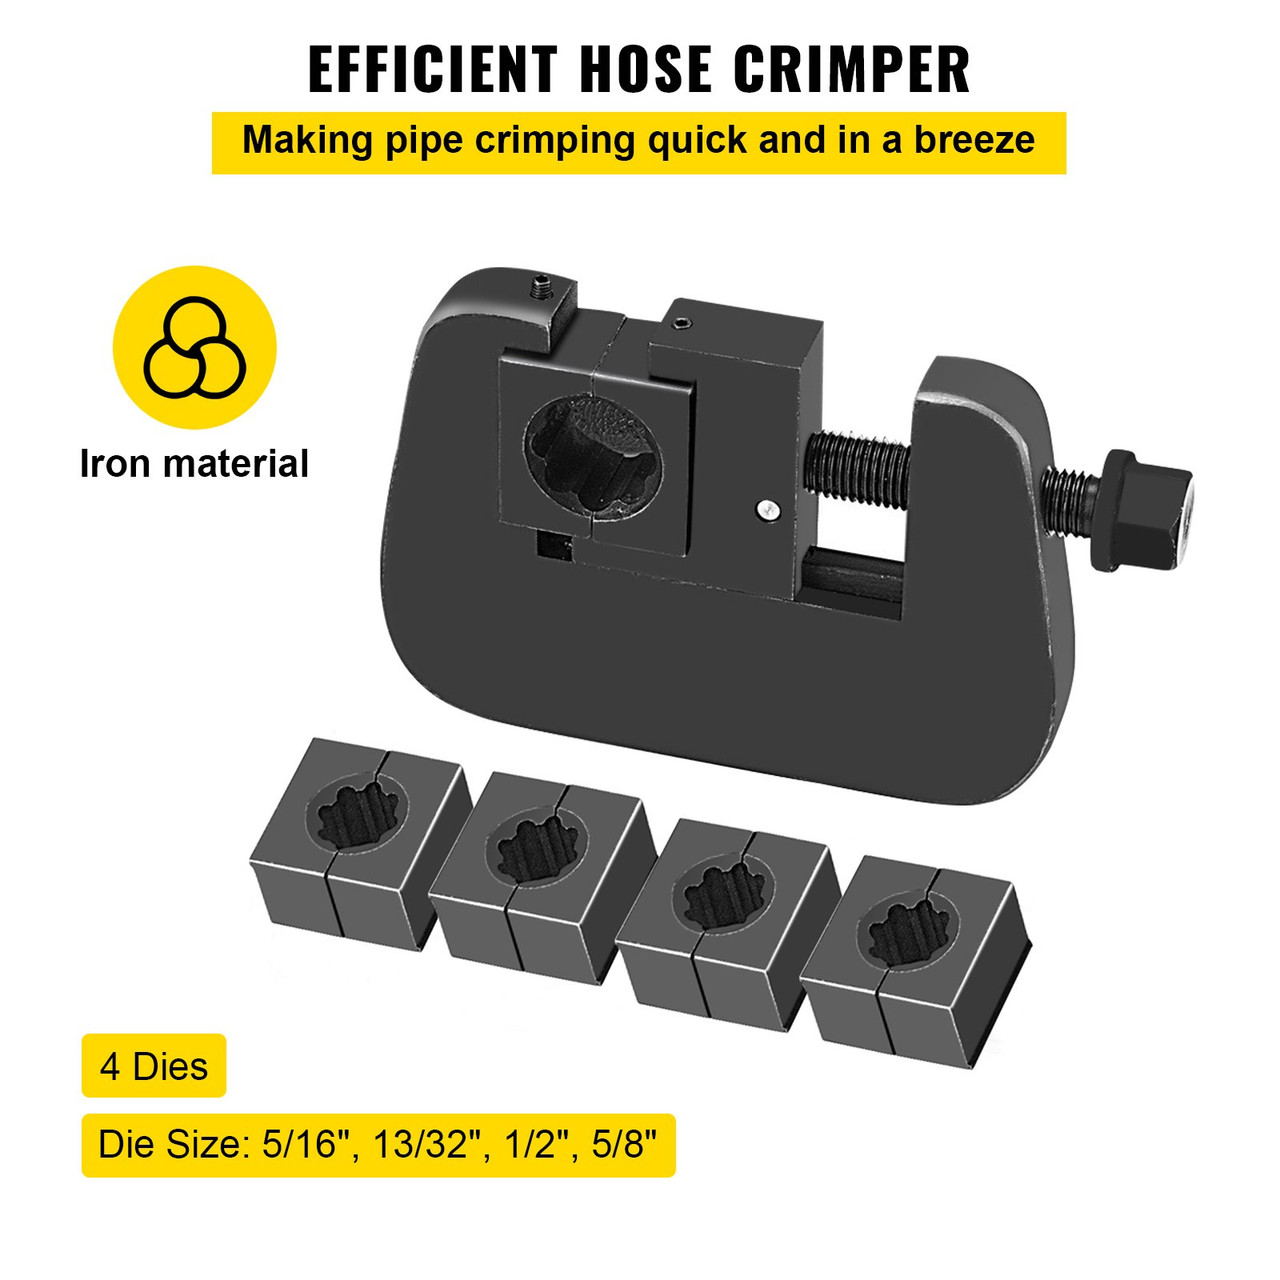 AG-7843B Manual A/C Hose Crimper kit is applicable for beadlocking fittings